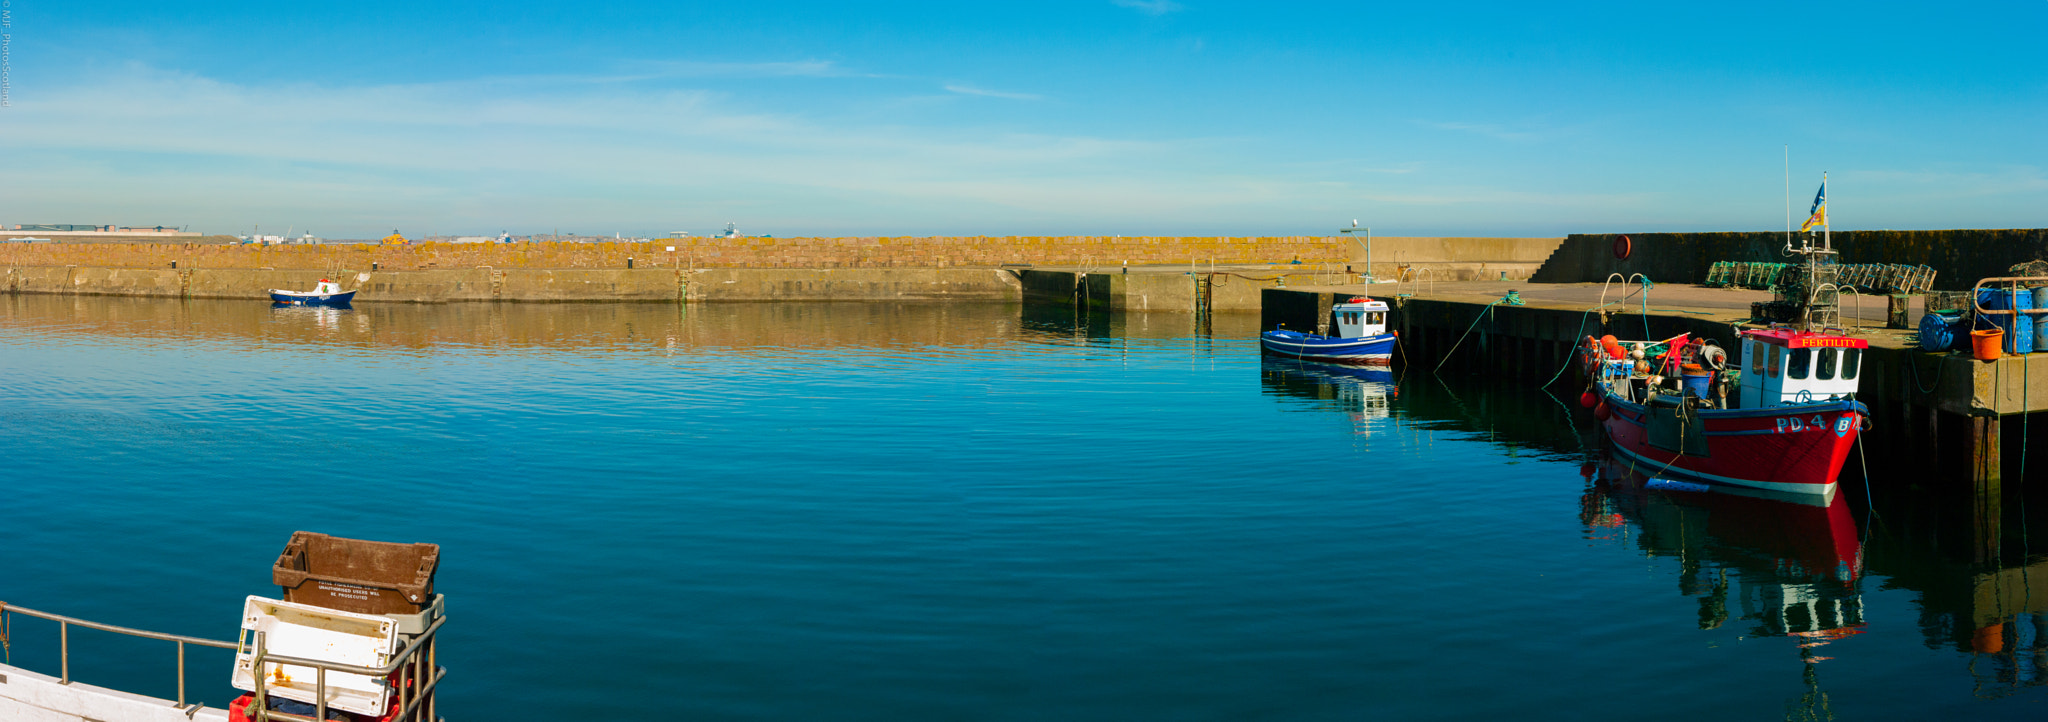 Samsung GX-20 sample photo. Boddam harbour. "safe haven" photography